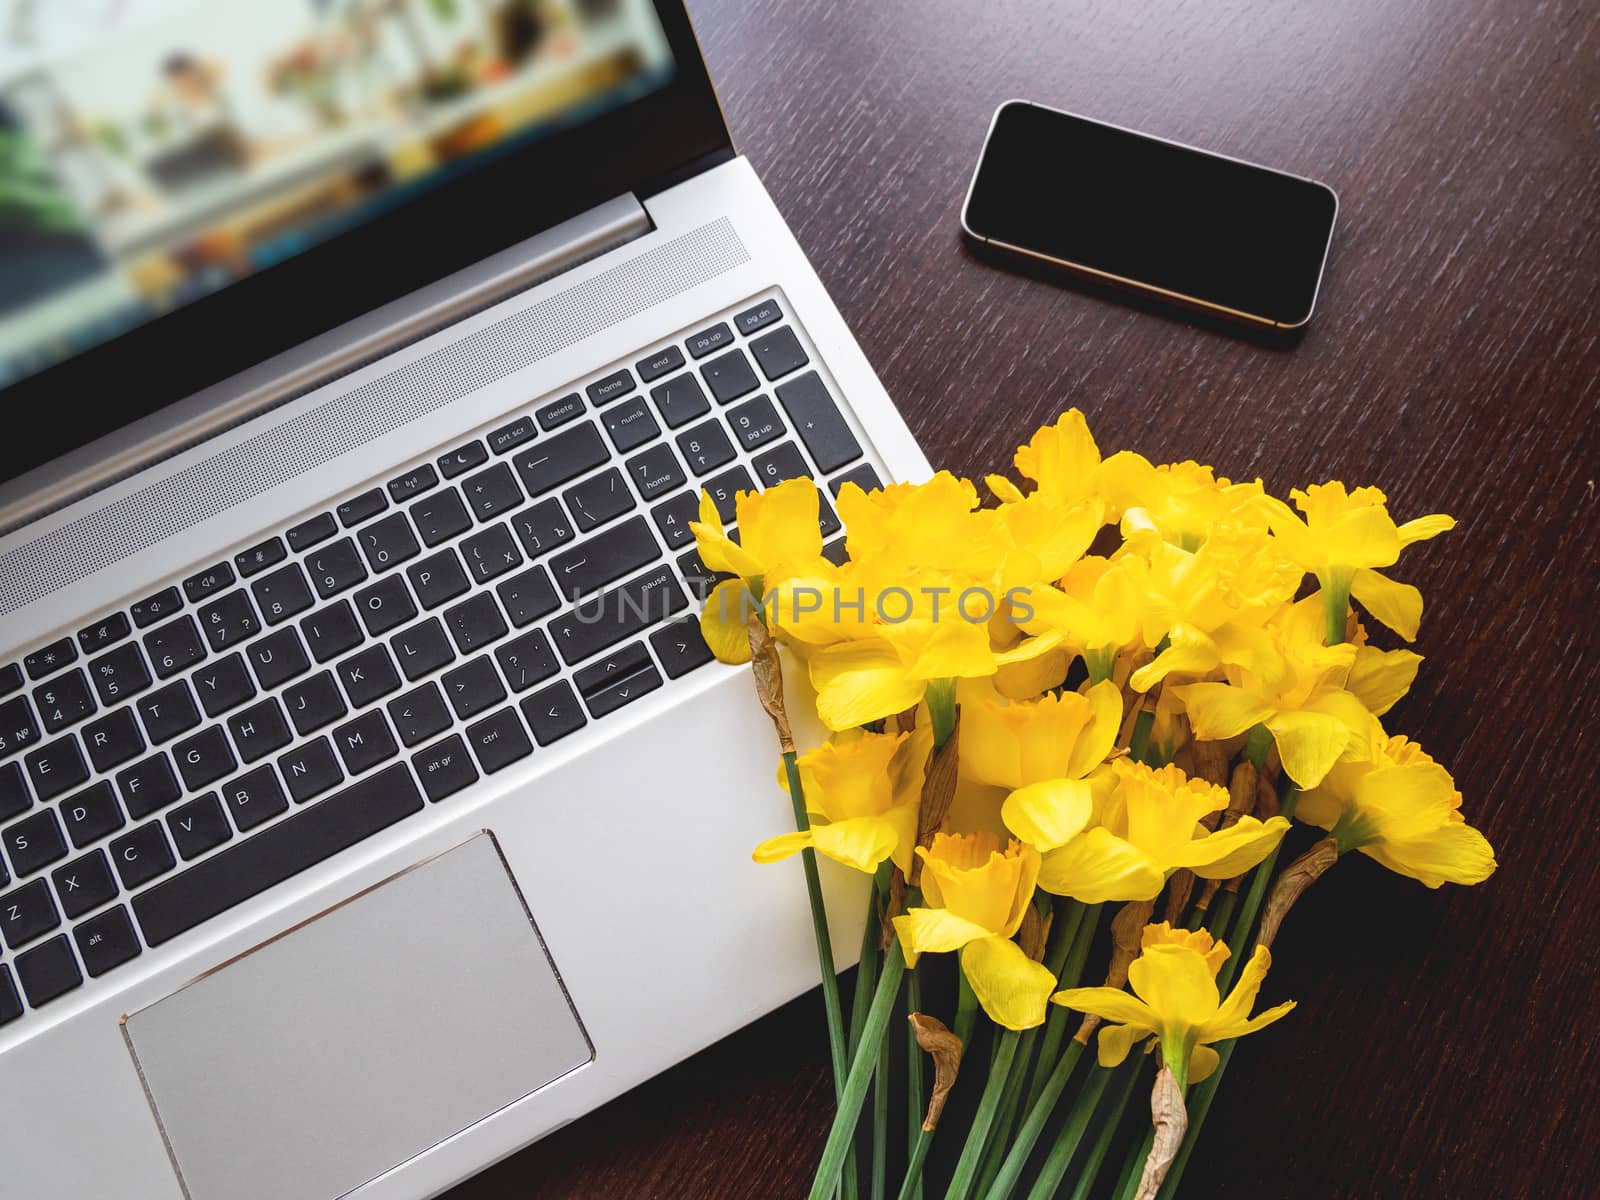 Bouquet of Narcissus or daffodils lying on silver metal laptop. Bright yellow flowers on portable device. Smartphone on wooden background.